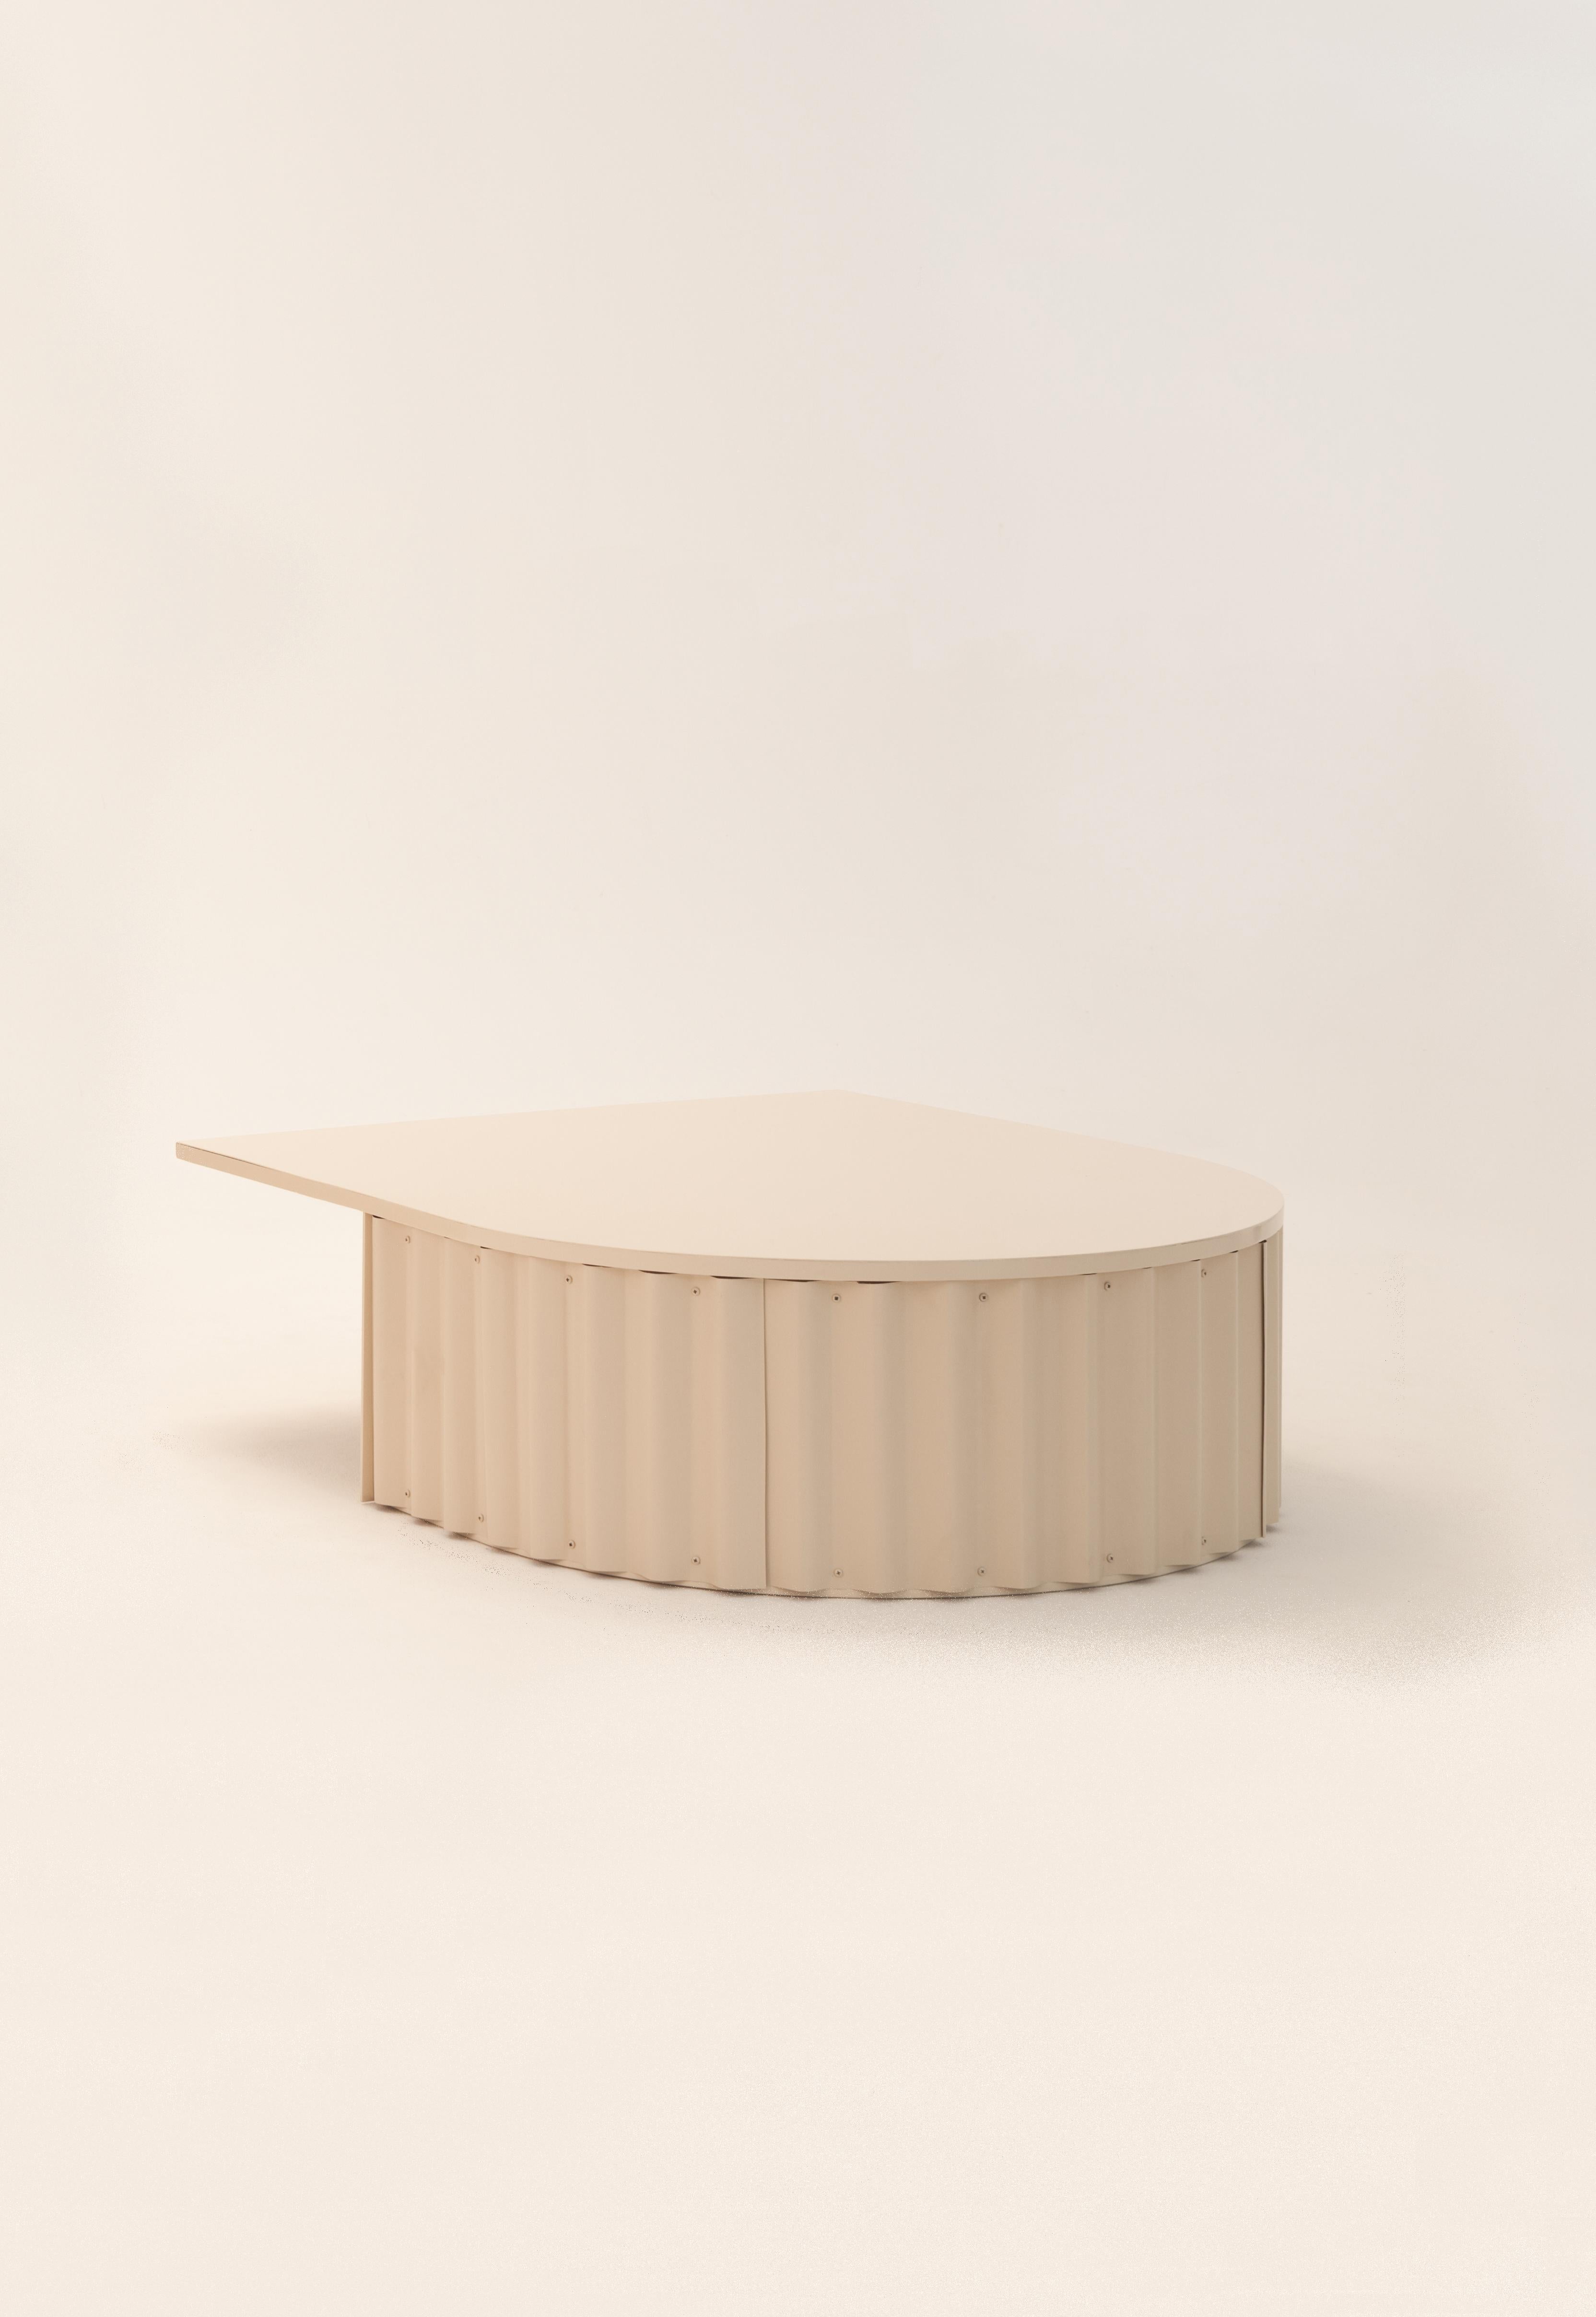 Ondula coffee table by Flatwig Studio 

Dimensions: L 100 x D 119.8 x H 35 cm
Materials: Iron structure, corrugated aluminium sheet
Colour: nude
Other colours (RAL Classic and RAL Design) are available on request. Please get in touch about the